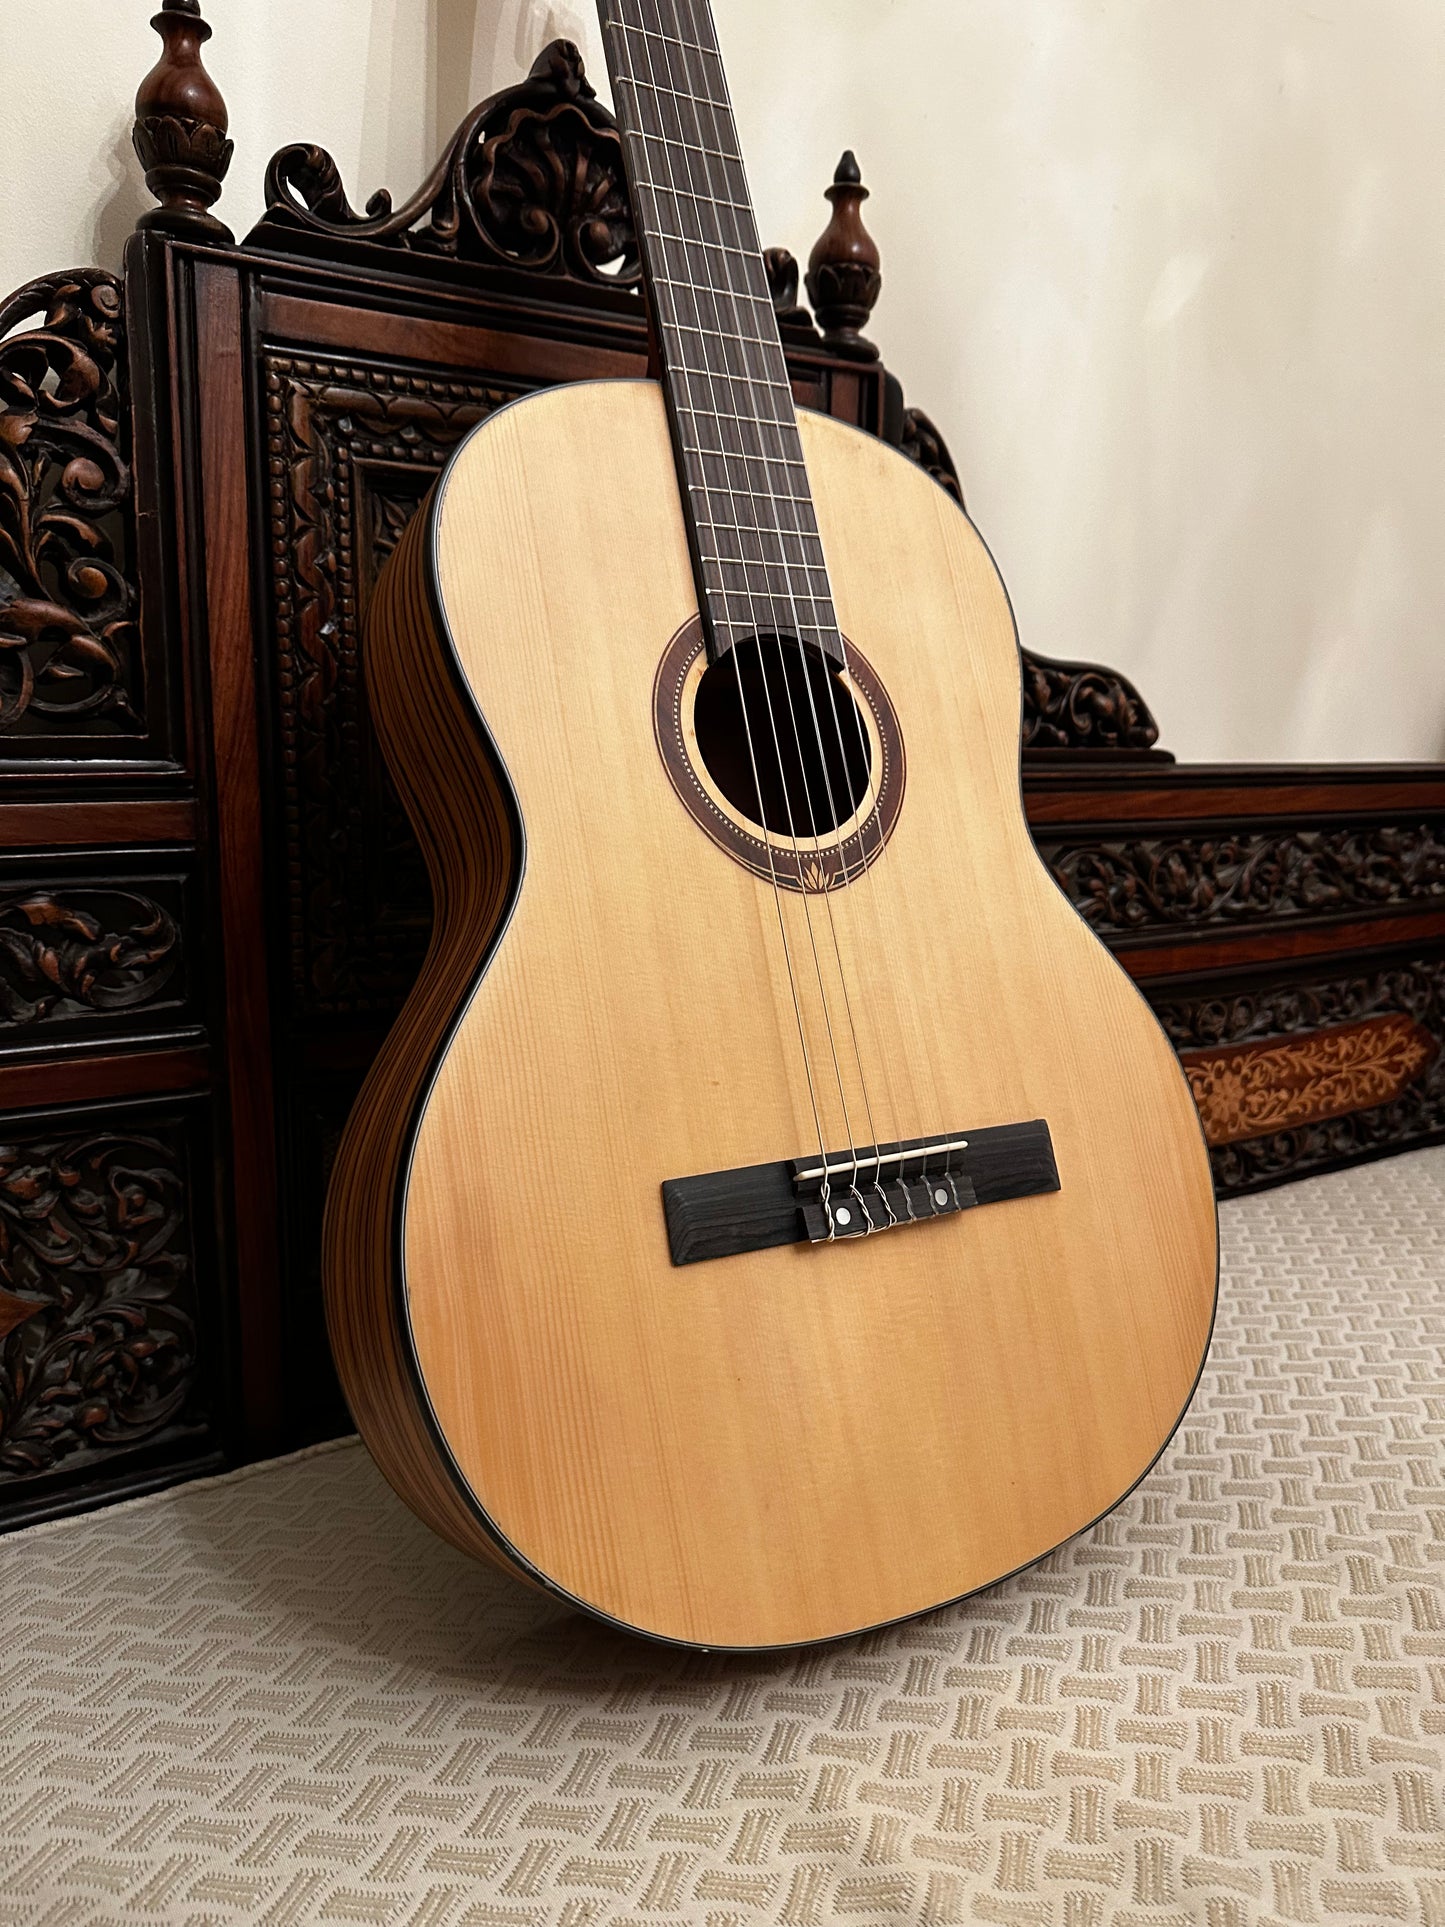 * Brand New * Moreno MCG70 full size classical guitar + free pack of accessories